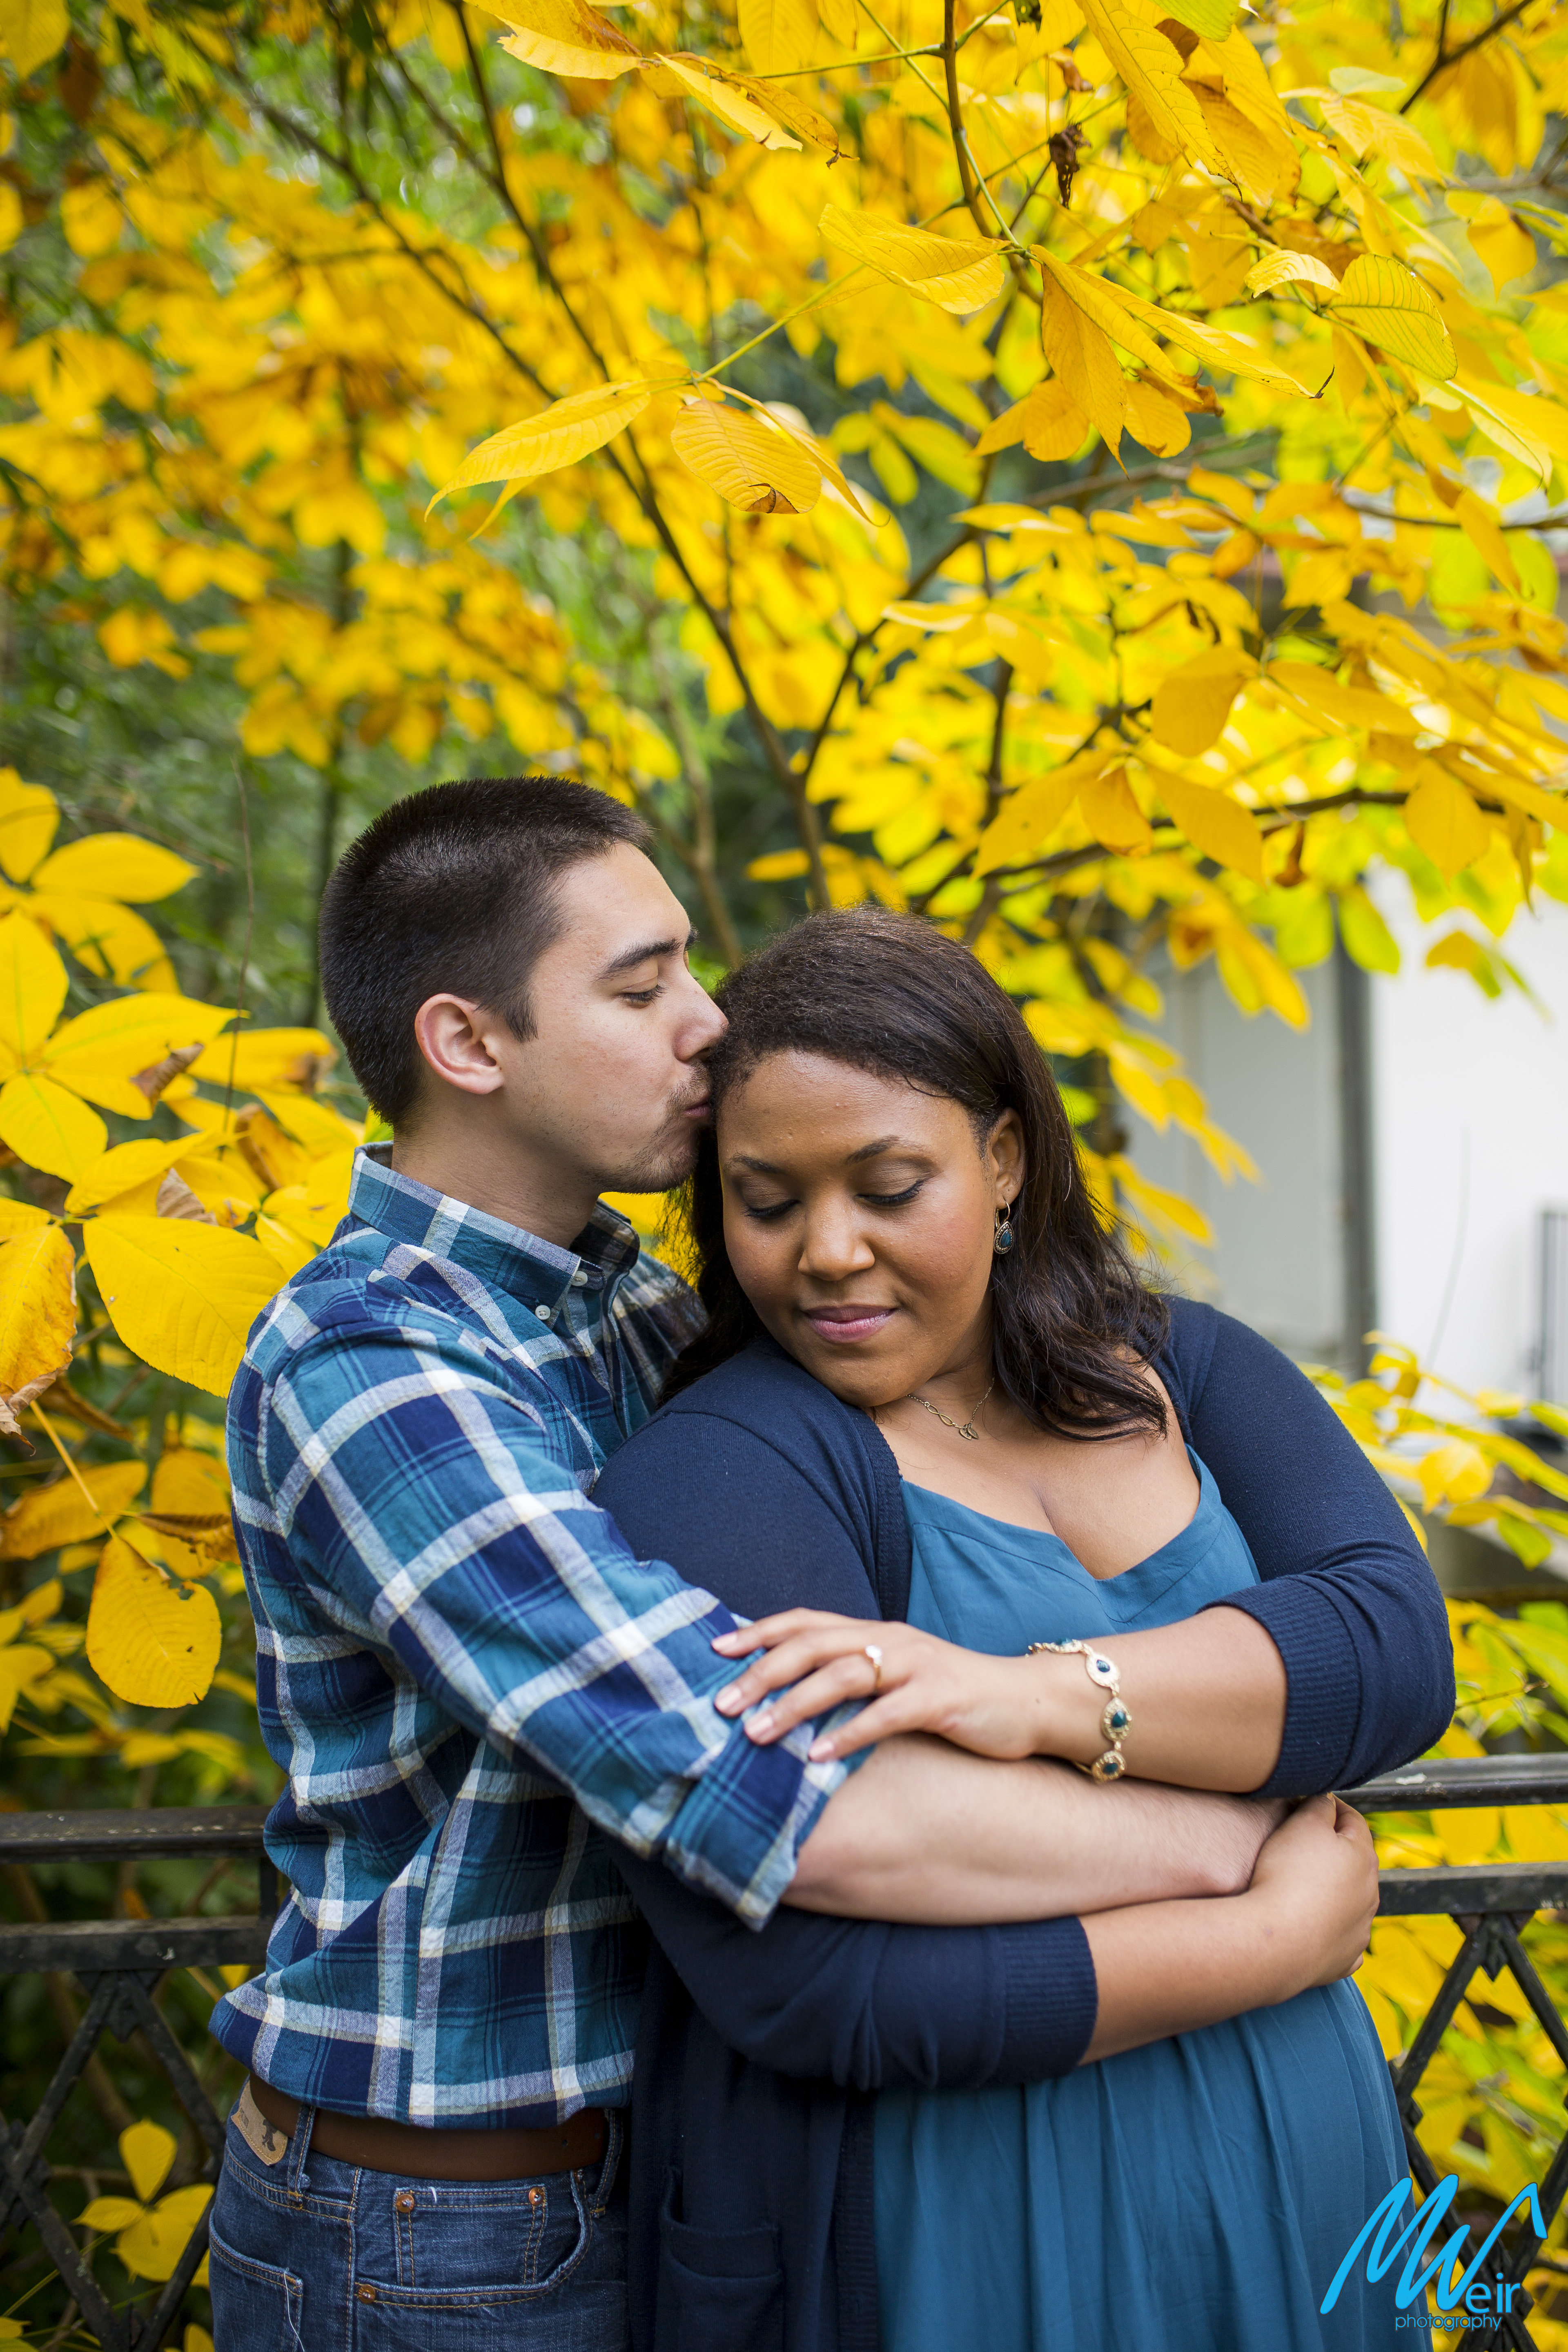 groom kisses bride's temple while holding her from behind in front of yellow fall leaves